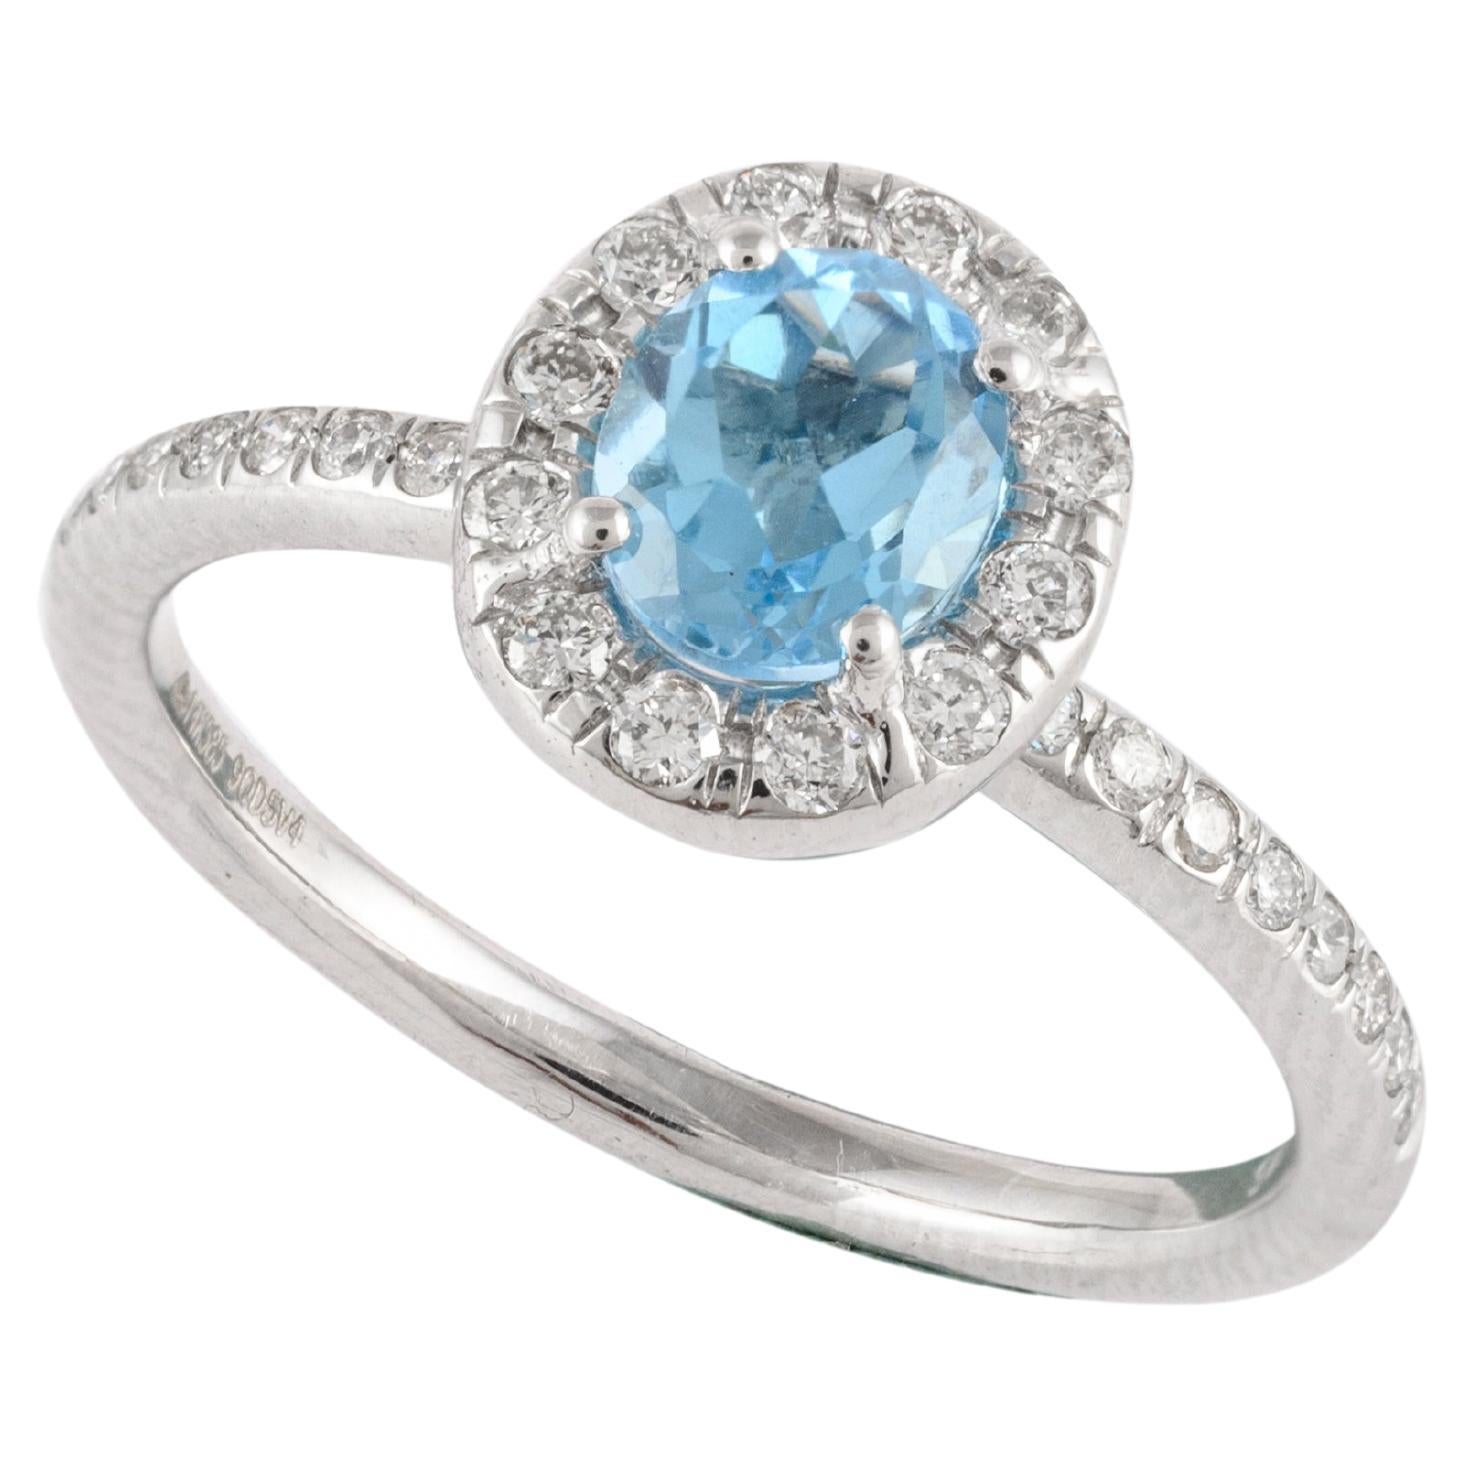 For Sale:  Real 14kt Solid White Gold Halo Diamond And Oval Cut Blue Topaz Ring For Her